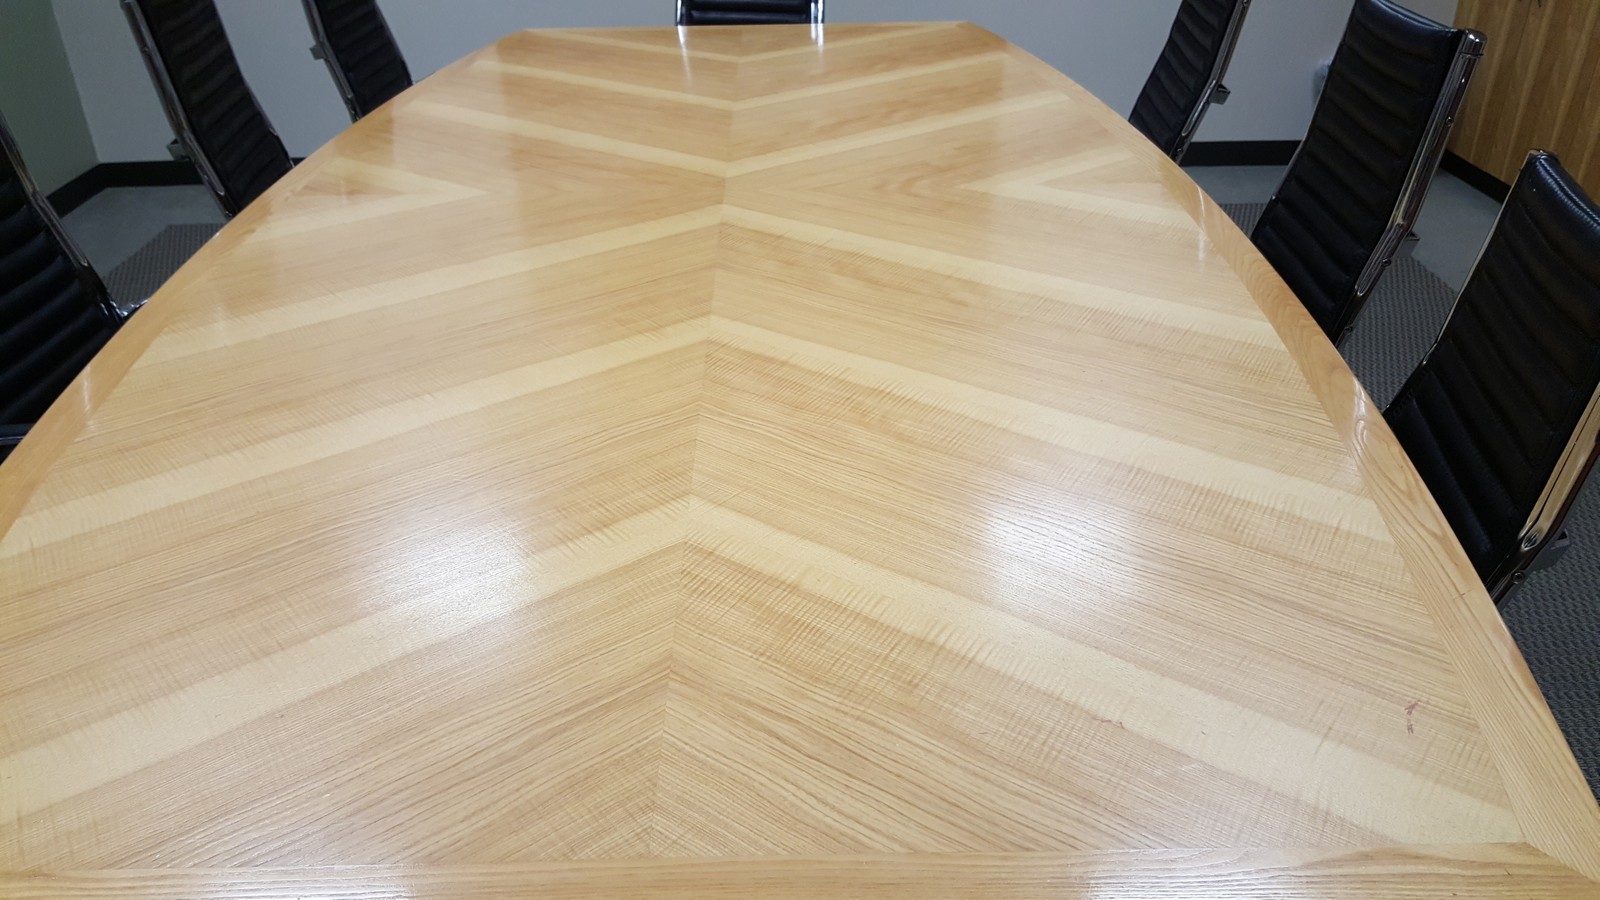 A detailed looked at one of our custom conference tables